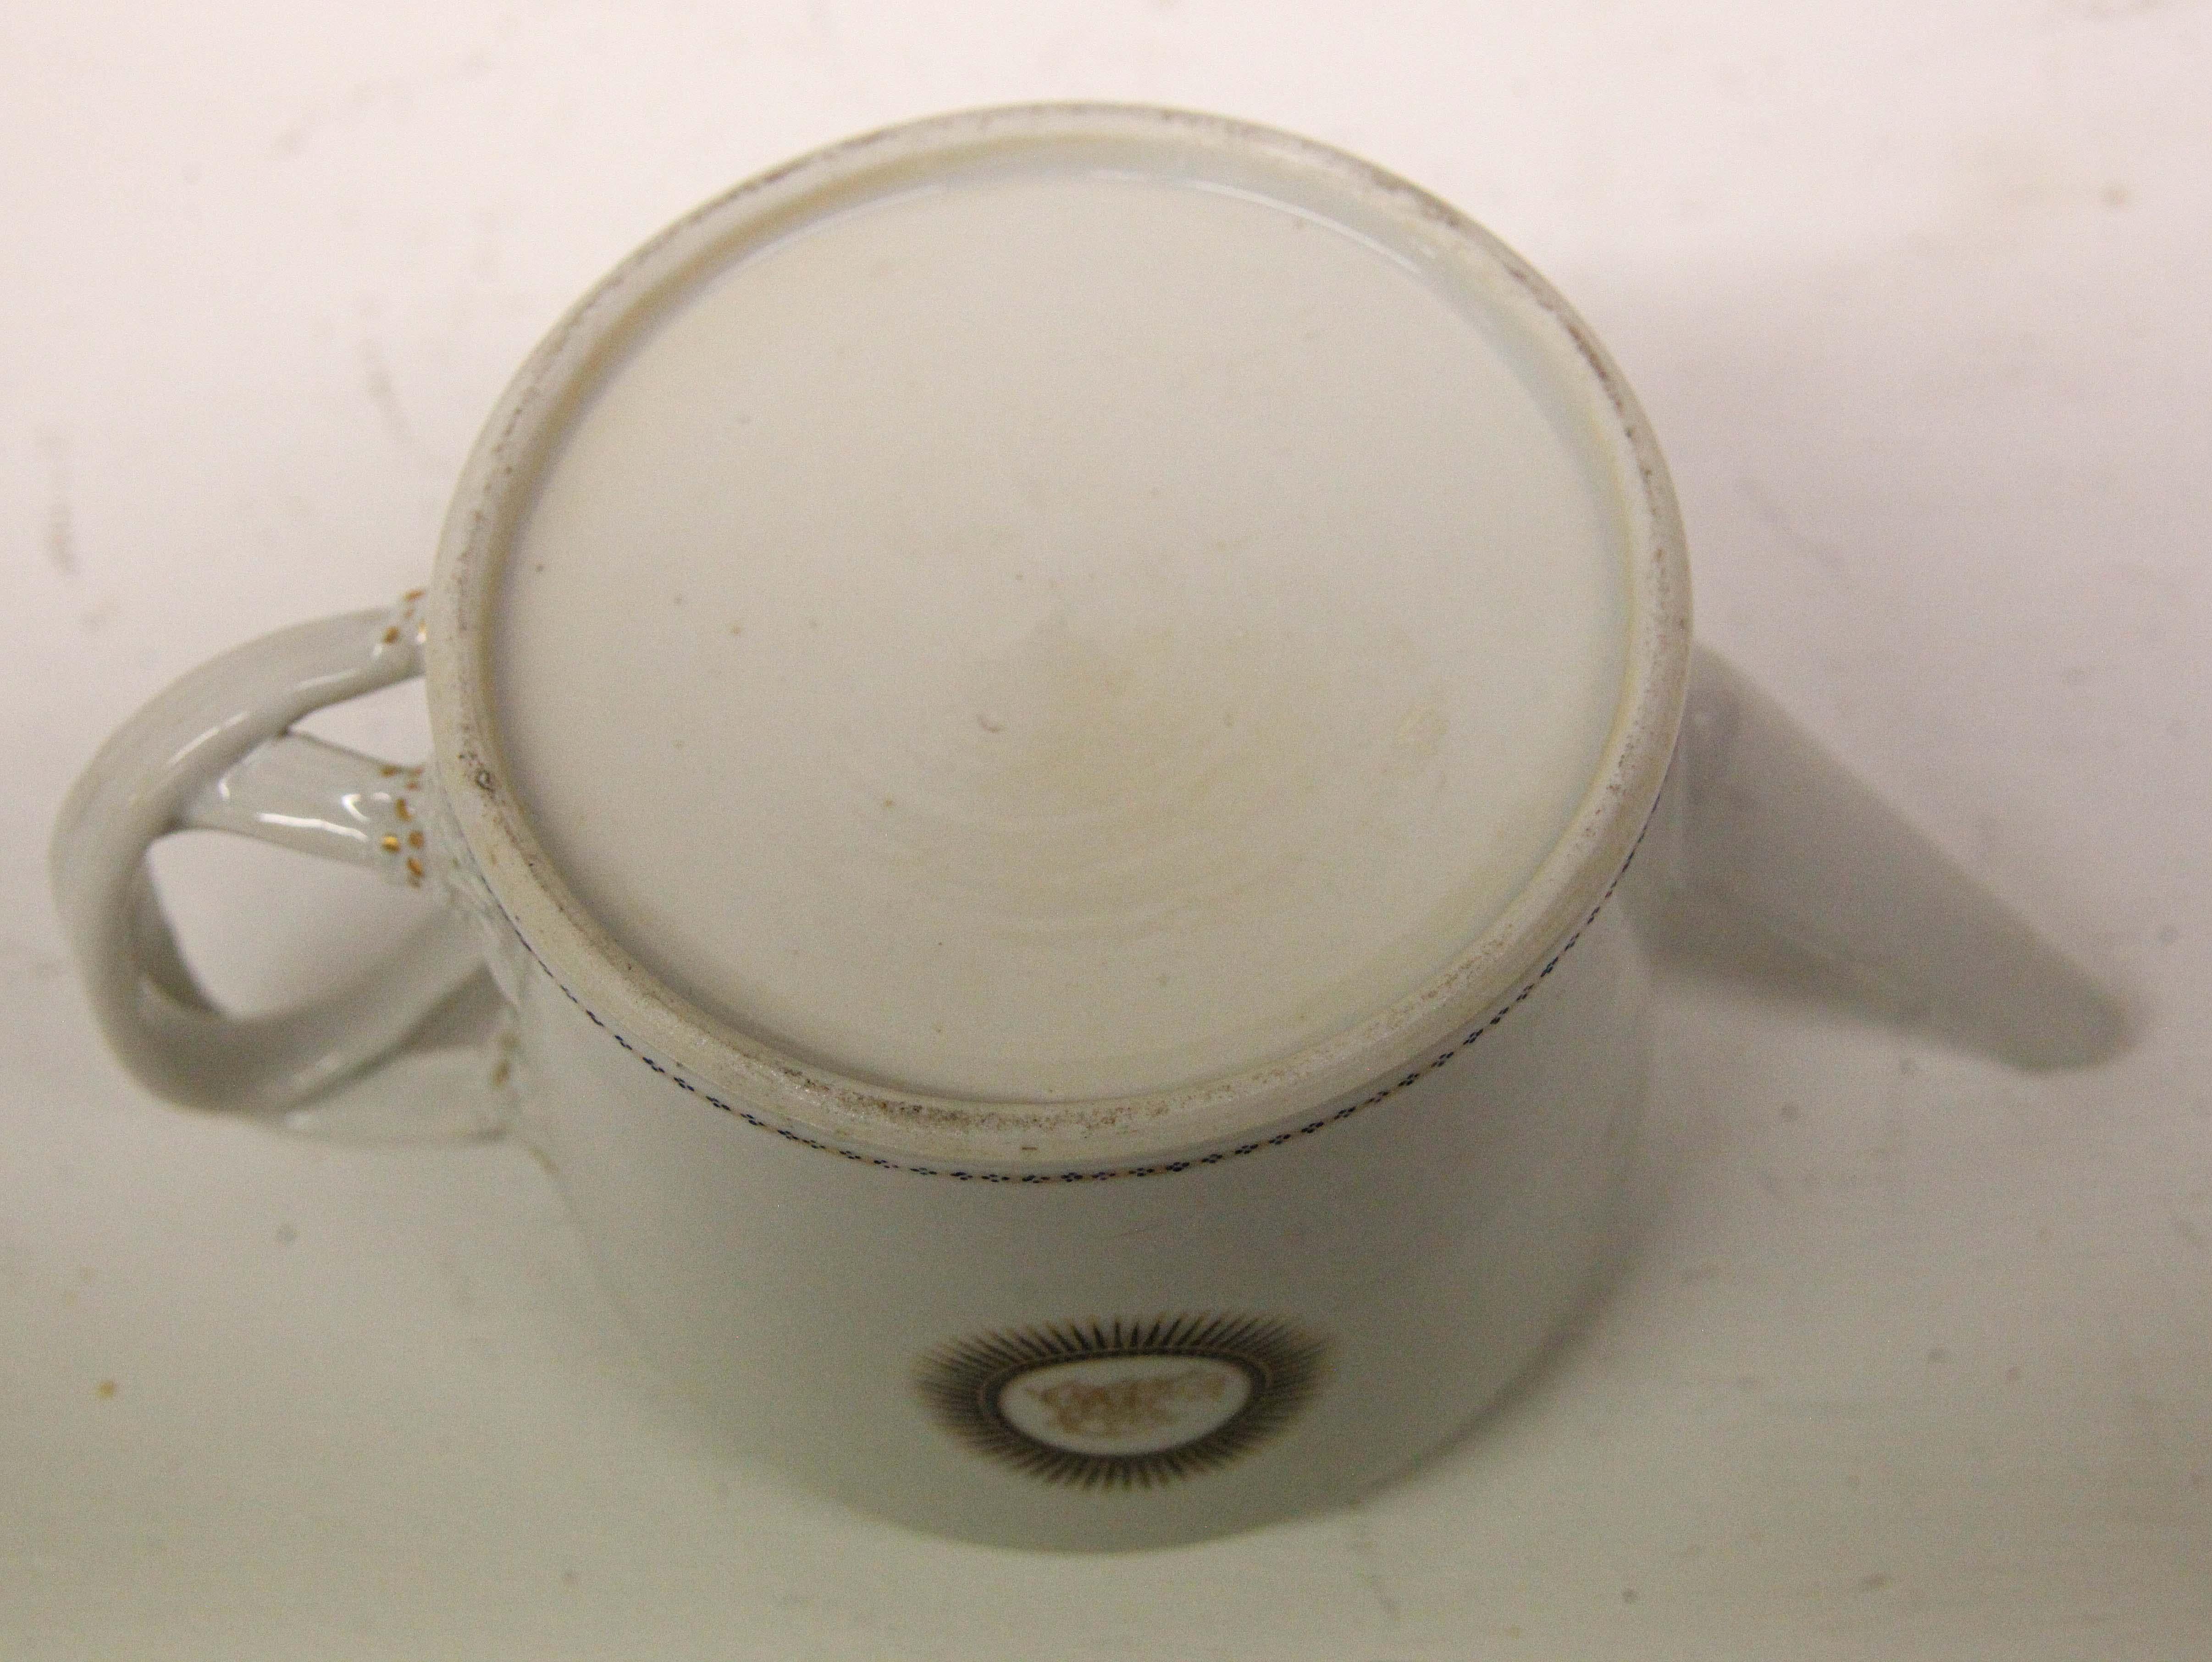 Chinese Export Blanc Porcelain Teapot In Good Condition For Sale In Wilson, NC